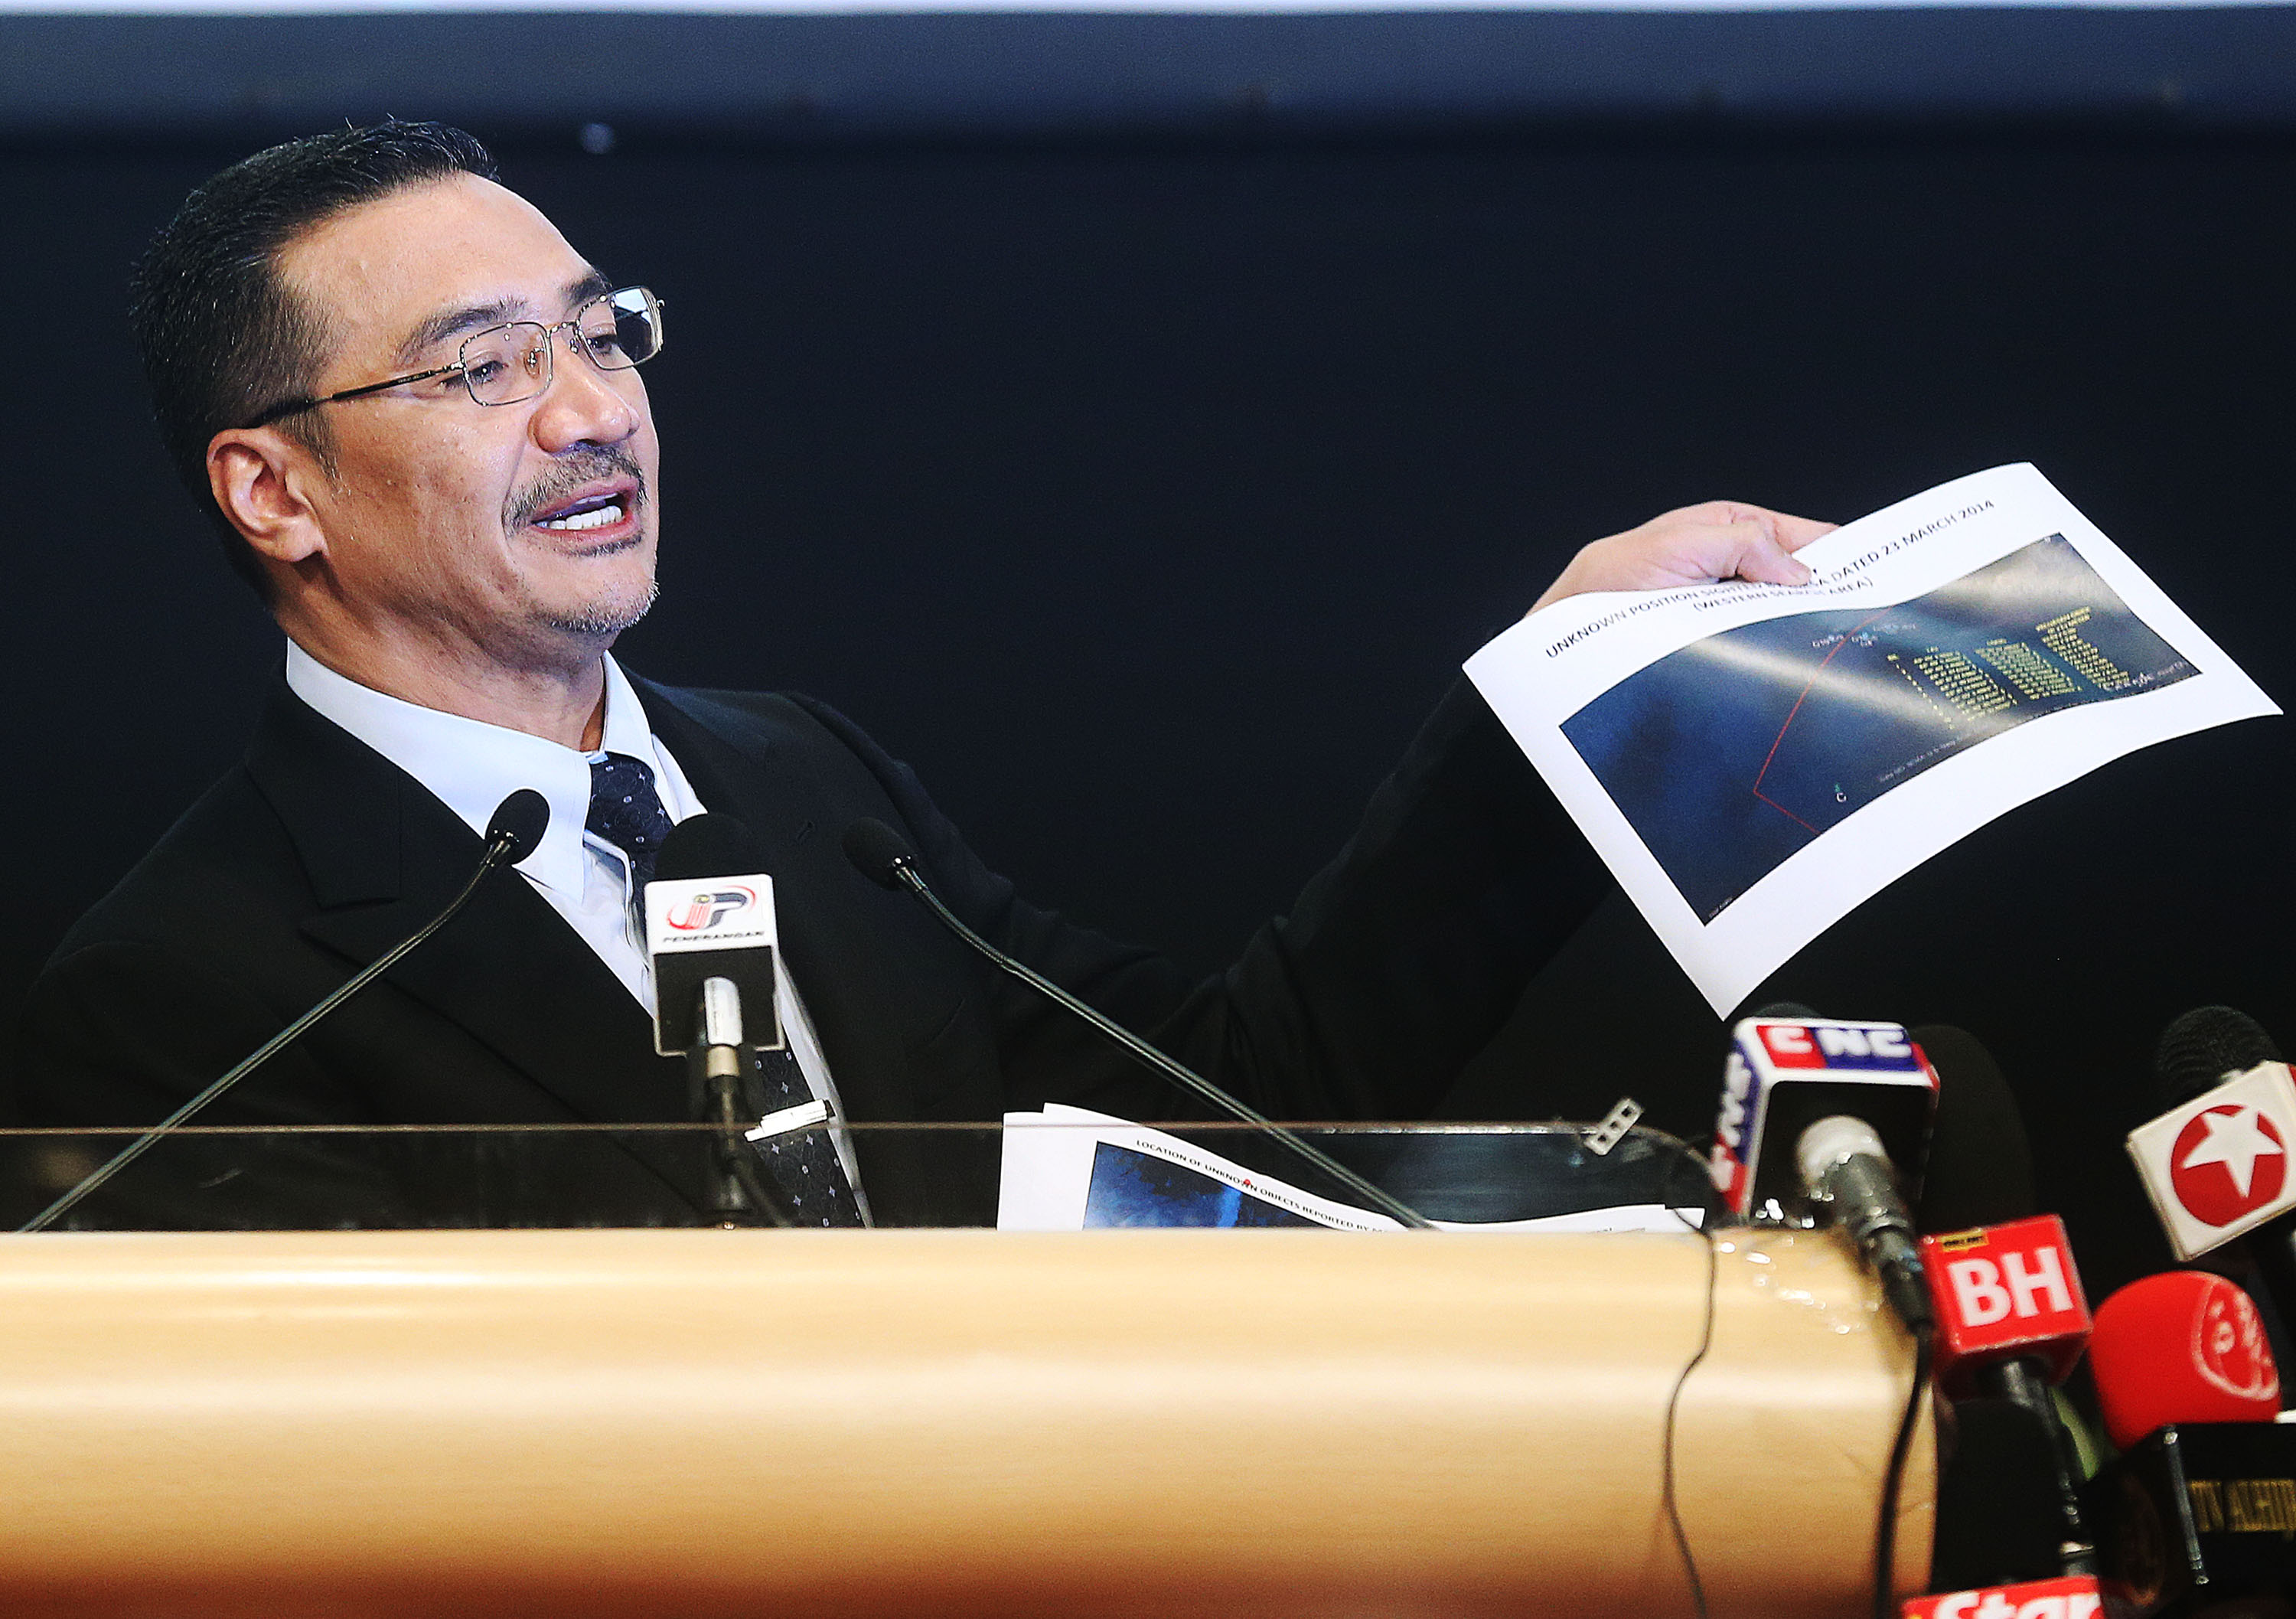 Malaysian acting Transport Minister Hishammuddin Hussein speaks during the press conference in Kuala Lumpur, Malaysia, March 26, 2014. Photo: Xinhua